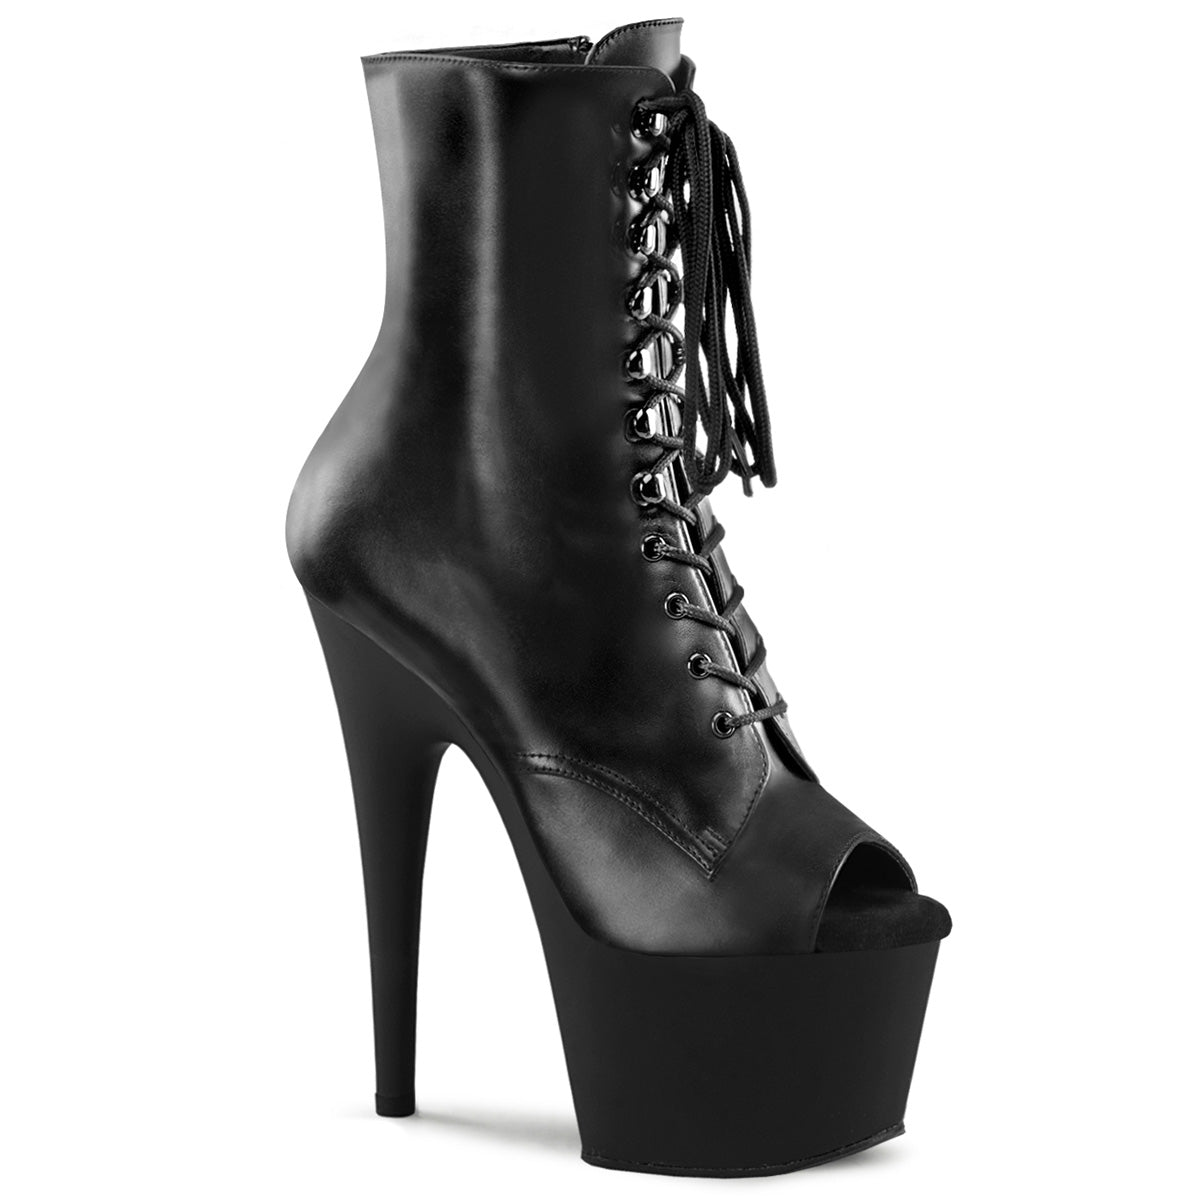 ADORE-1021 - Black Leather Ankle Boots